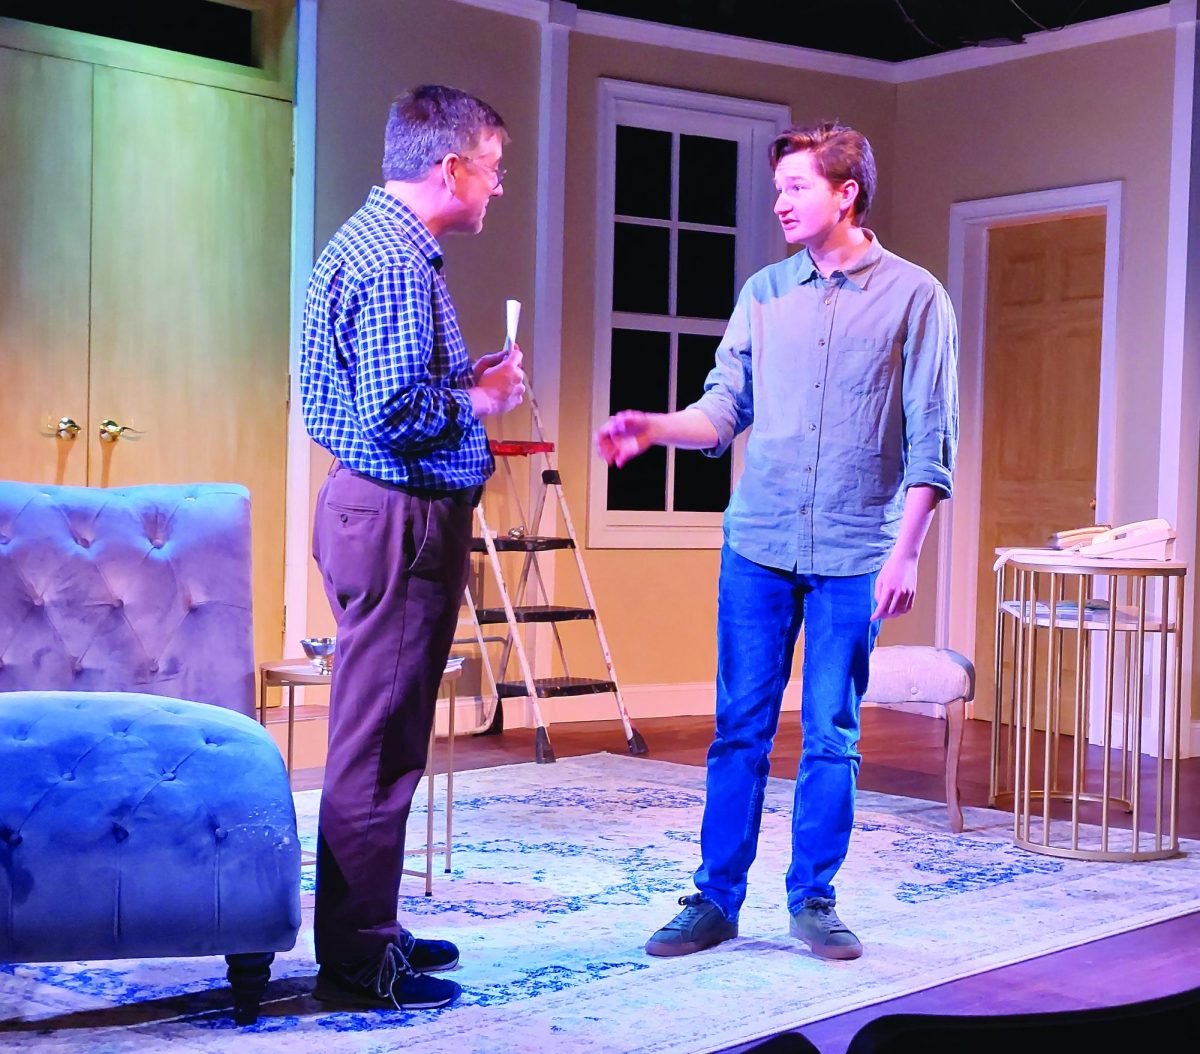 Whats my line?…Rehearsing for opening night, artistic director Tony Braithwaite (left) and director of marketing Nick Cardillo run lines for the upcoming Act II Playhouse production, “It’s Only a Play.” The play is set to run from March 19-April 14. 